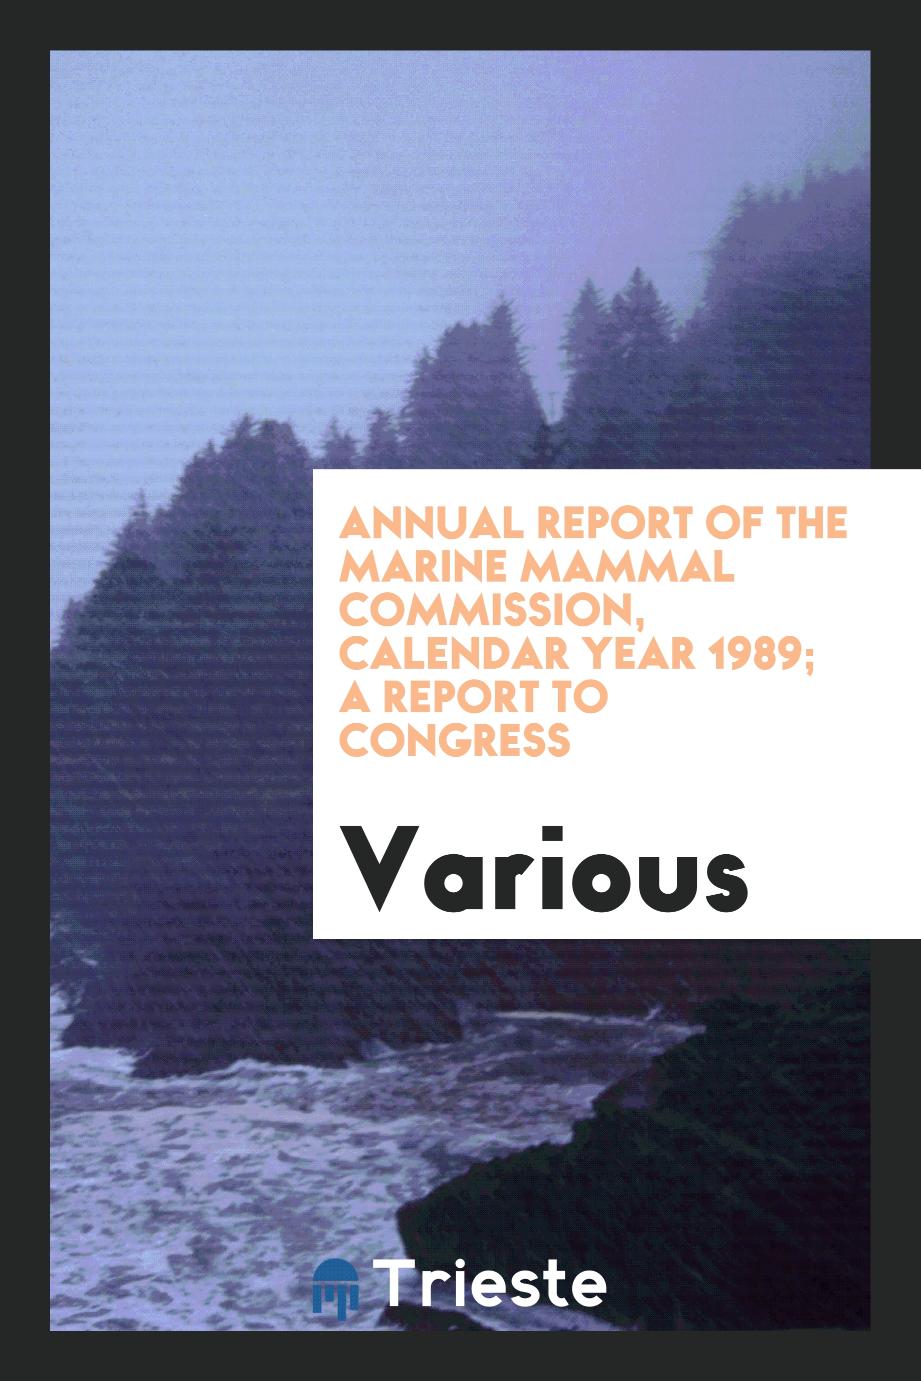 Annual report of the Marine Mammal Commission, Calendar Year 1989; a report to Congress